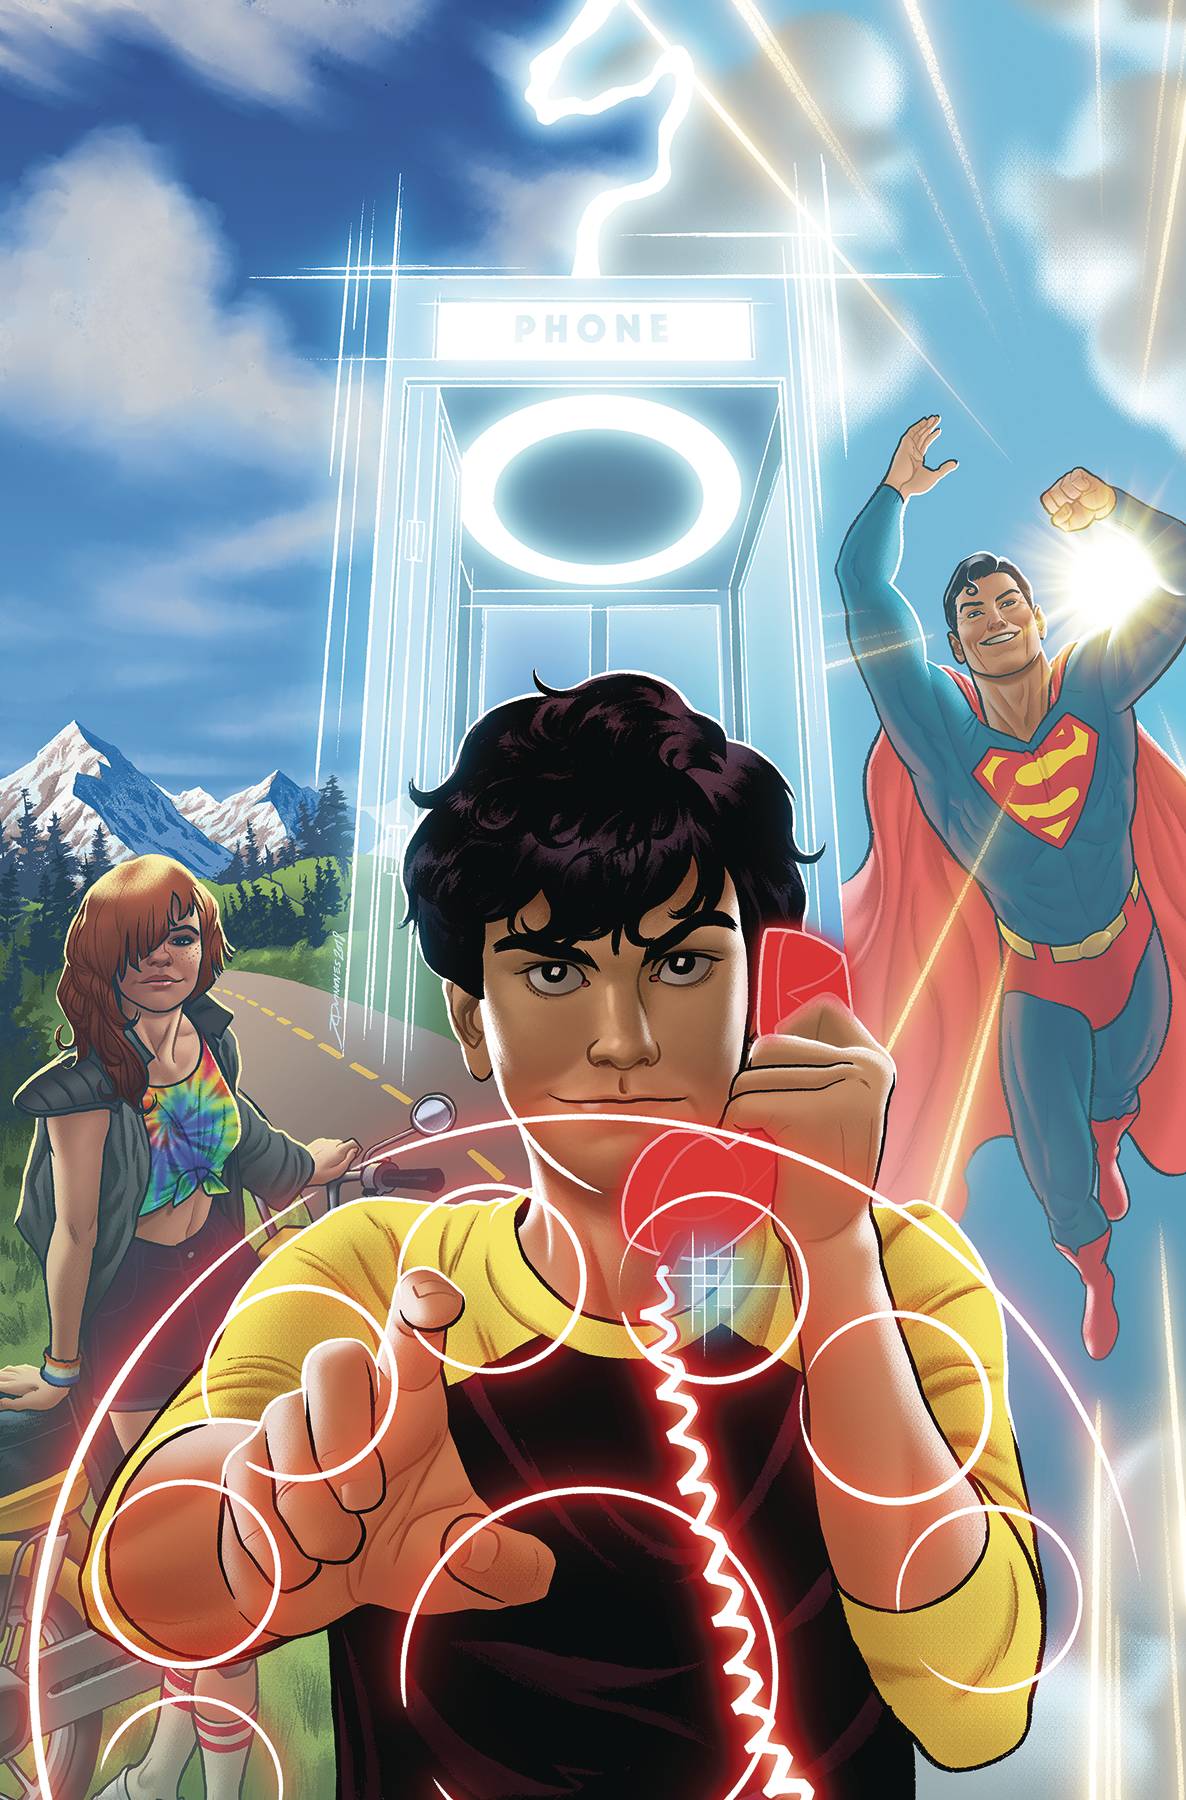 DIAL H FOR HERO #1 (OF 6) 03/27/19 FOC 03/04/19